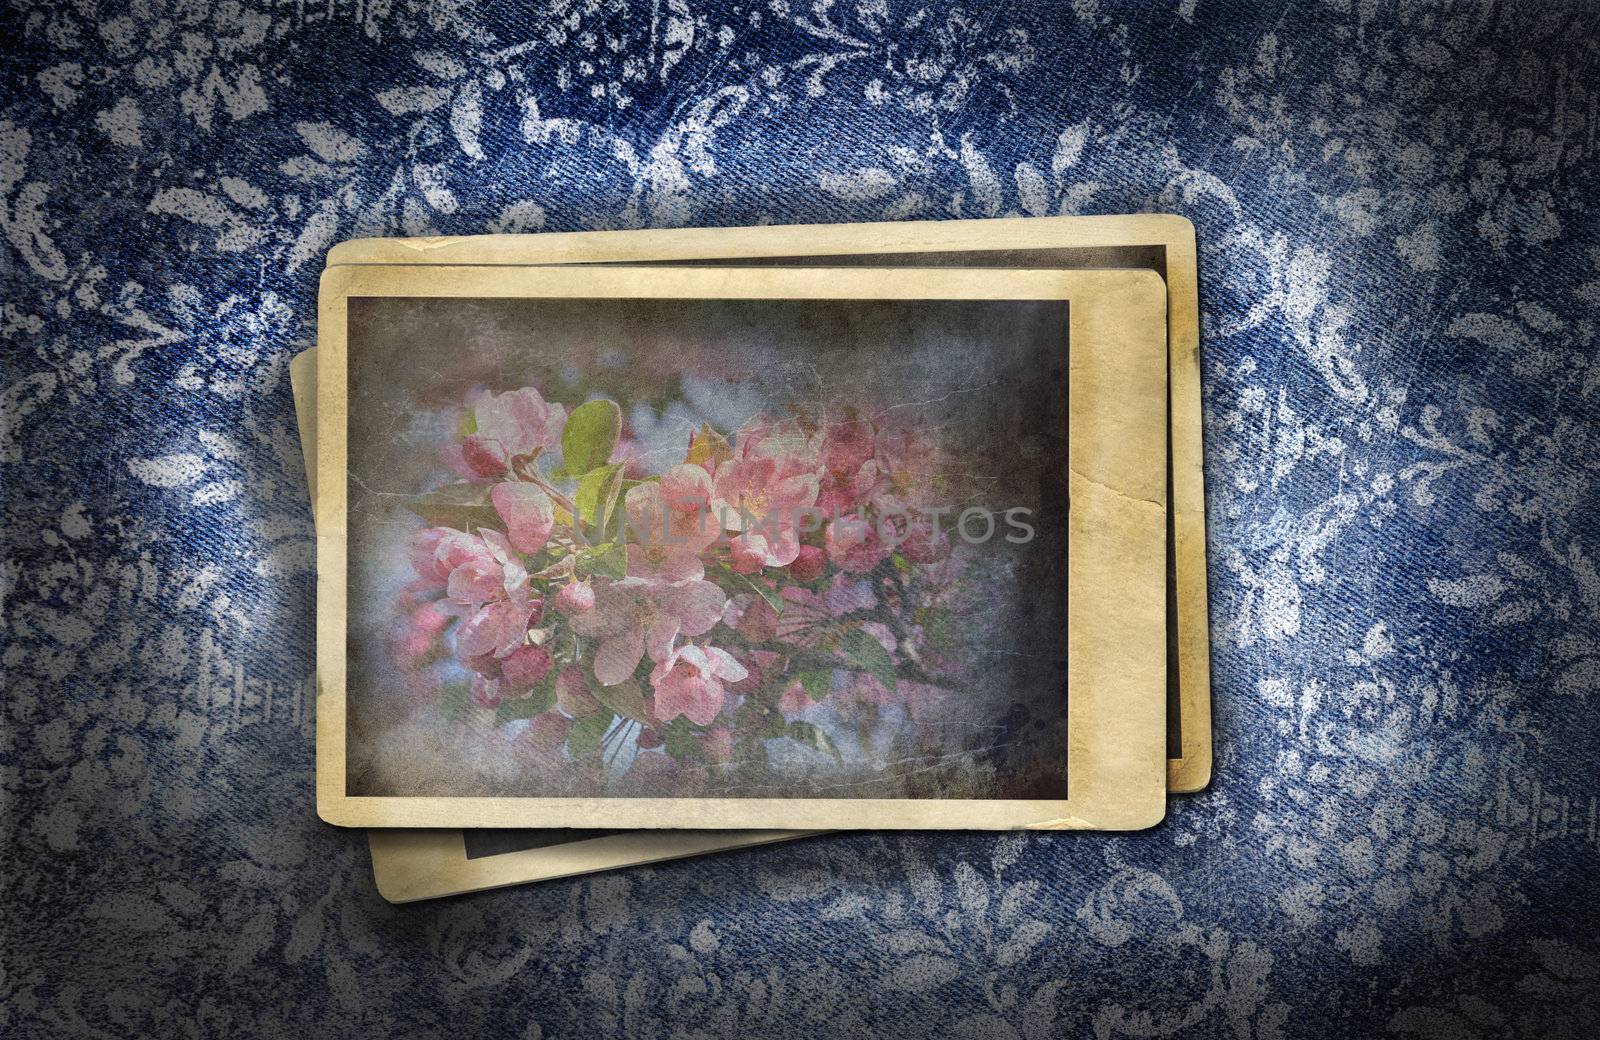 Grungy faded denim effect with old vintage photos by Sandralise